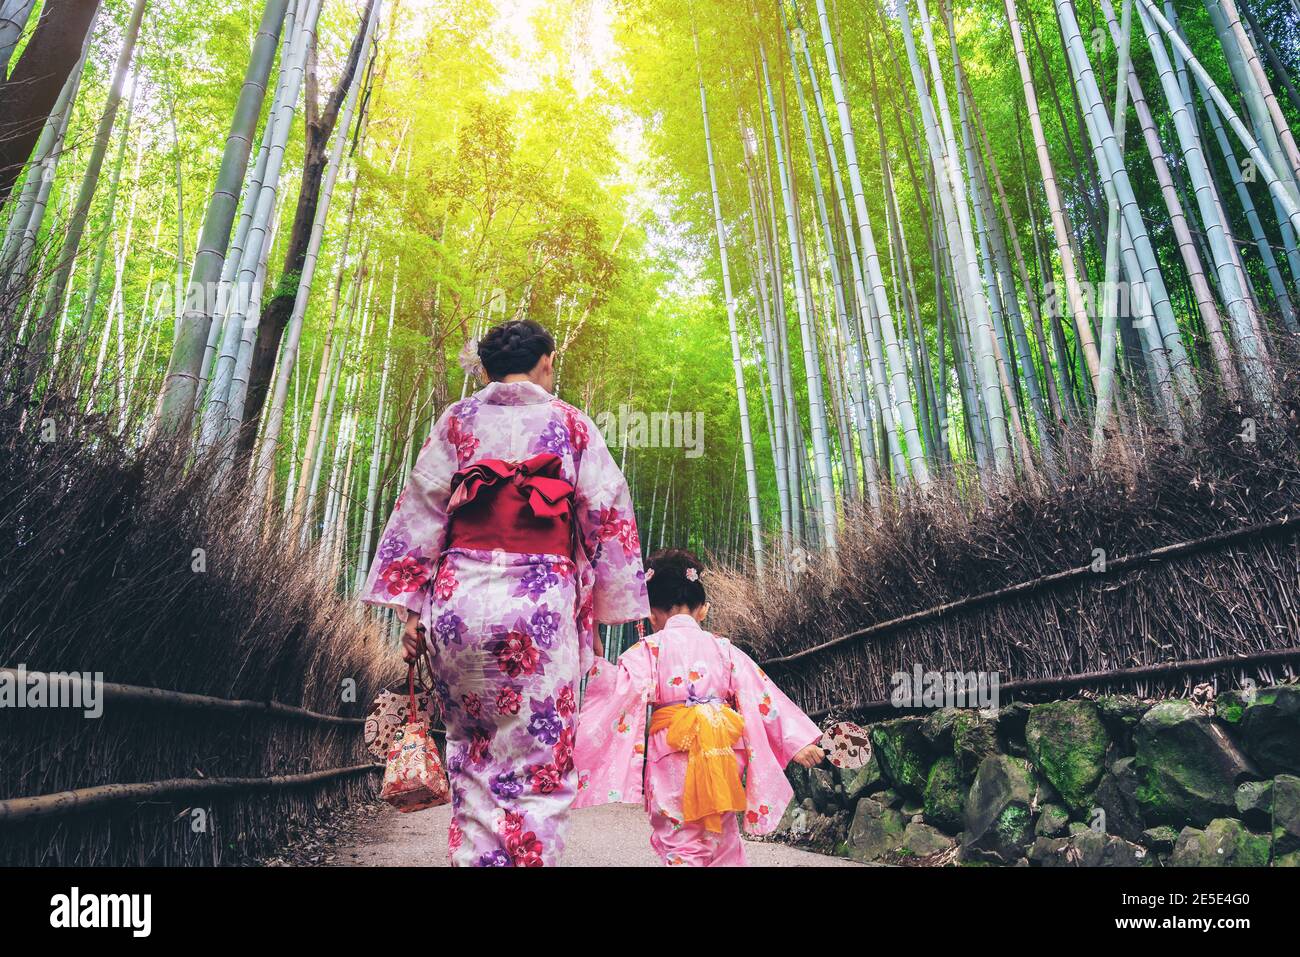 Kyoto, Japan Culture Travel - Asian traveler wearing traditional Japanese kimono walking in Arashiyama Bamboo Forest Grove in the old town of Kyoto Stock Photo